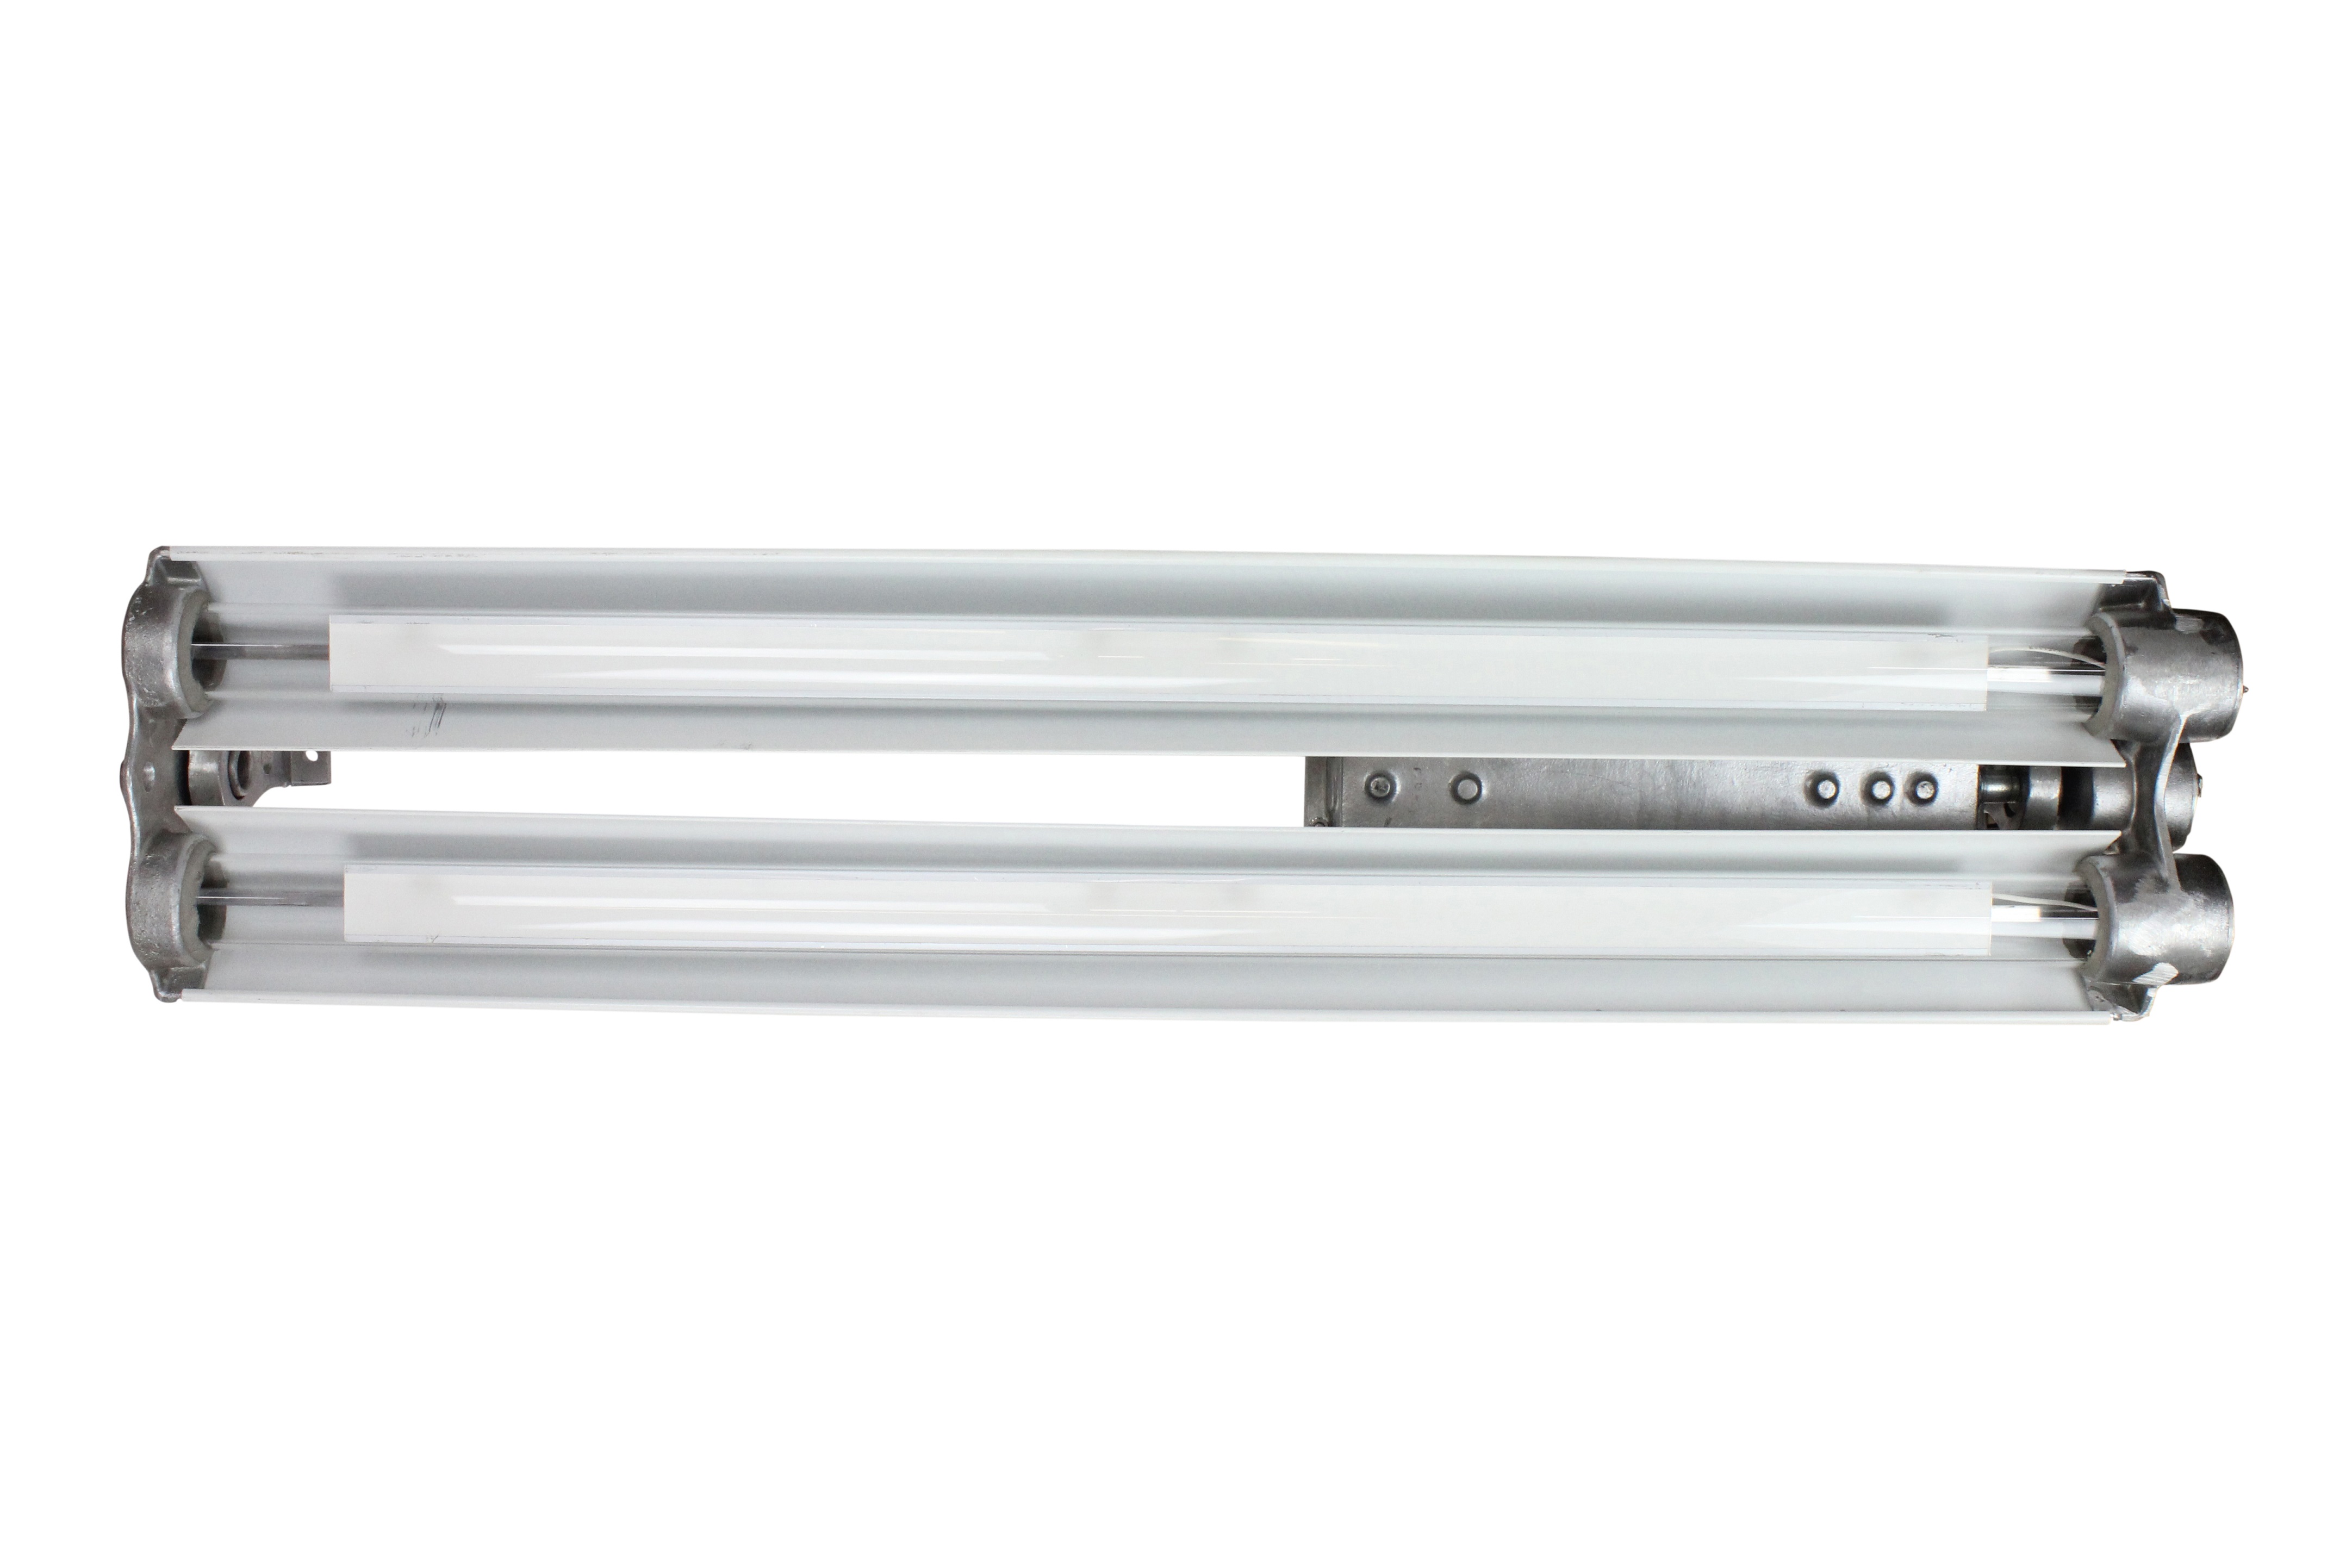 Class 1 Division 1 Integrated LED Light Fixture that produces 8,000 Lumens of Light